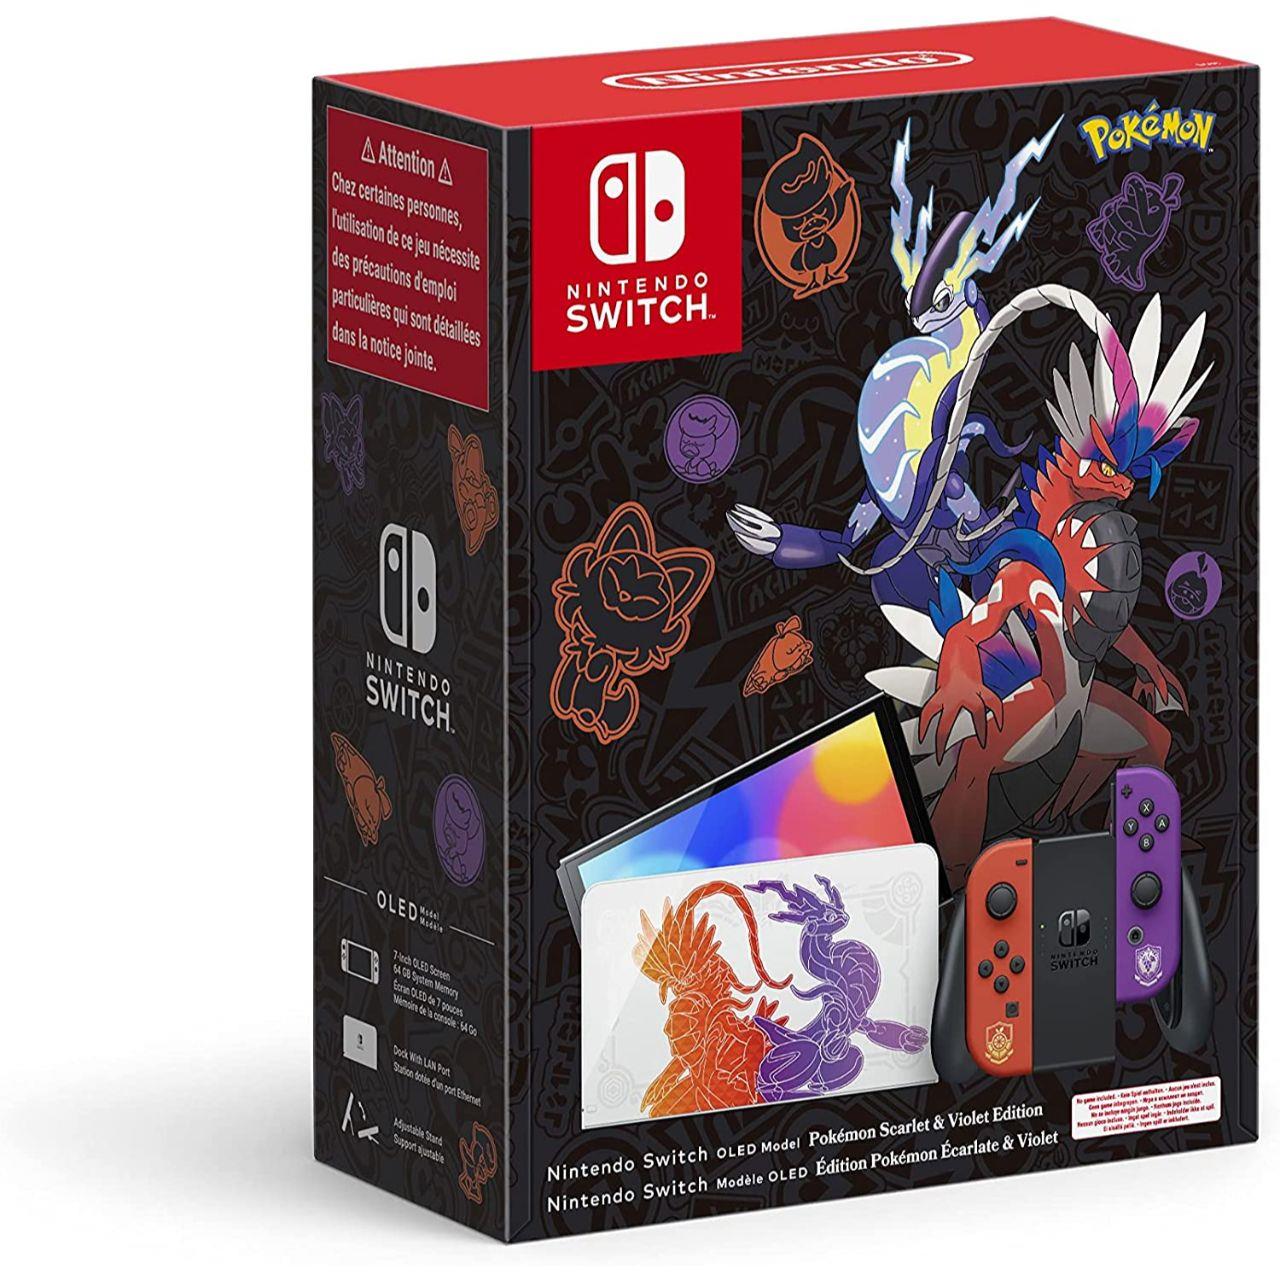 Nintendo Switch OLED Model Console - Pokemon Scarlet & Violet Limited Edition